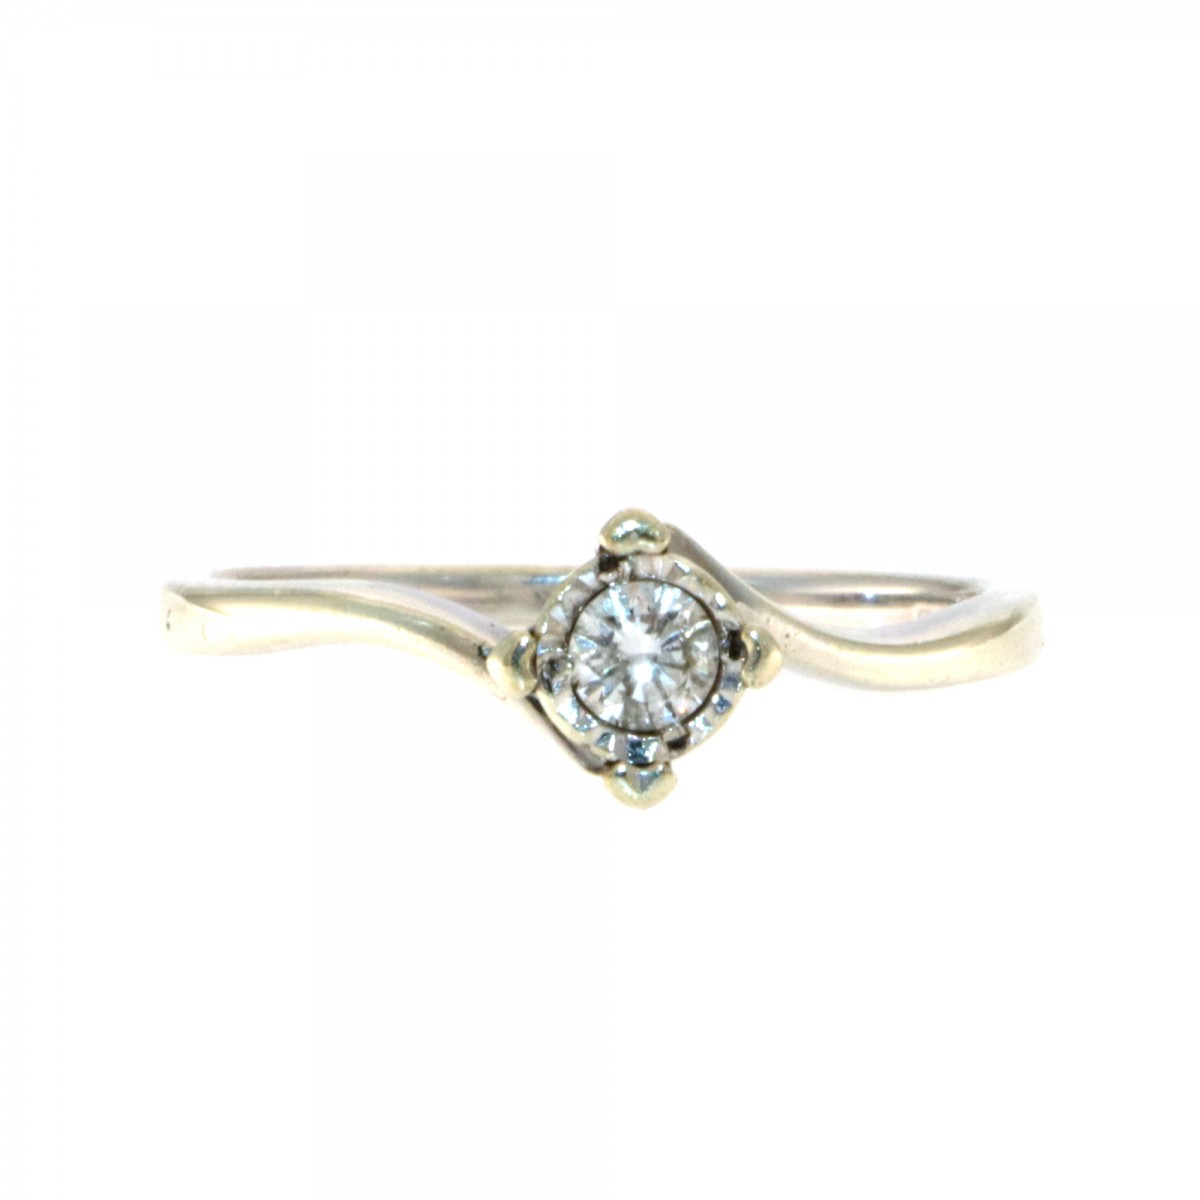 English Diamond Ring (Pre-Owned)